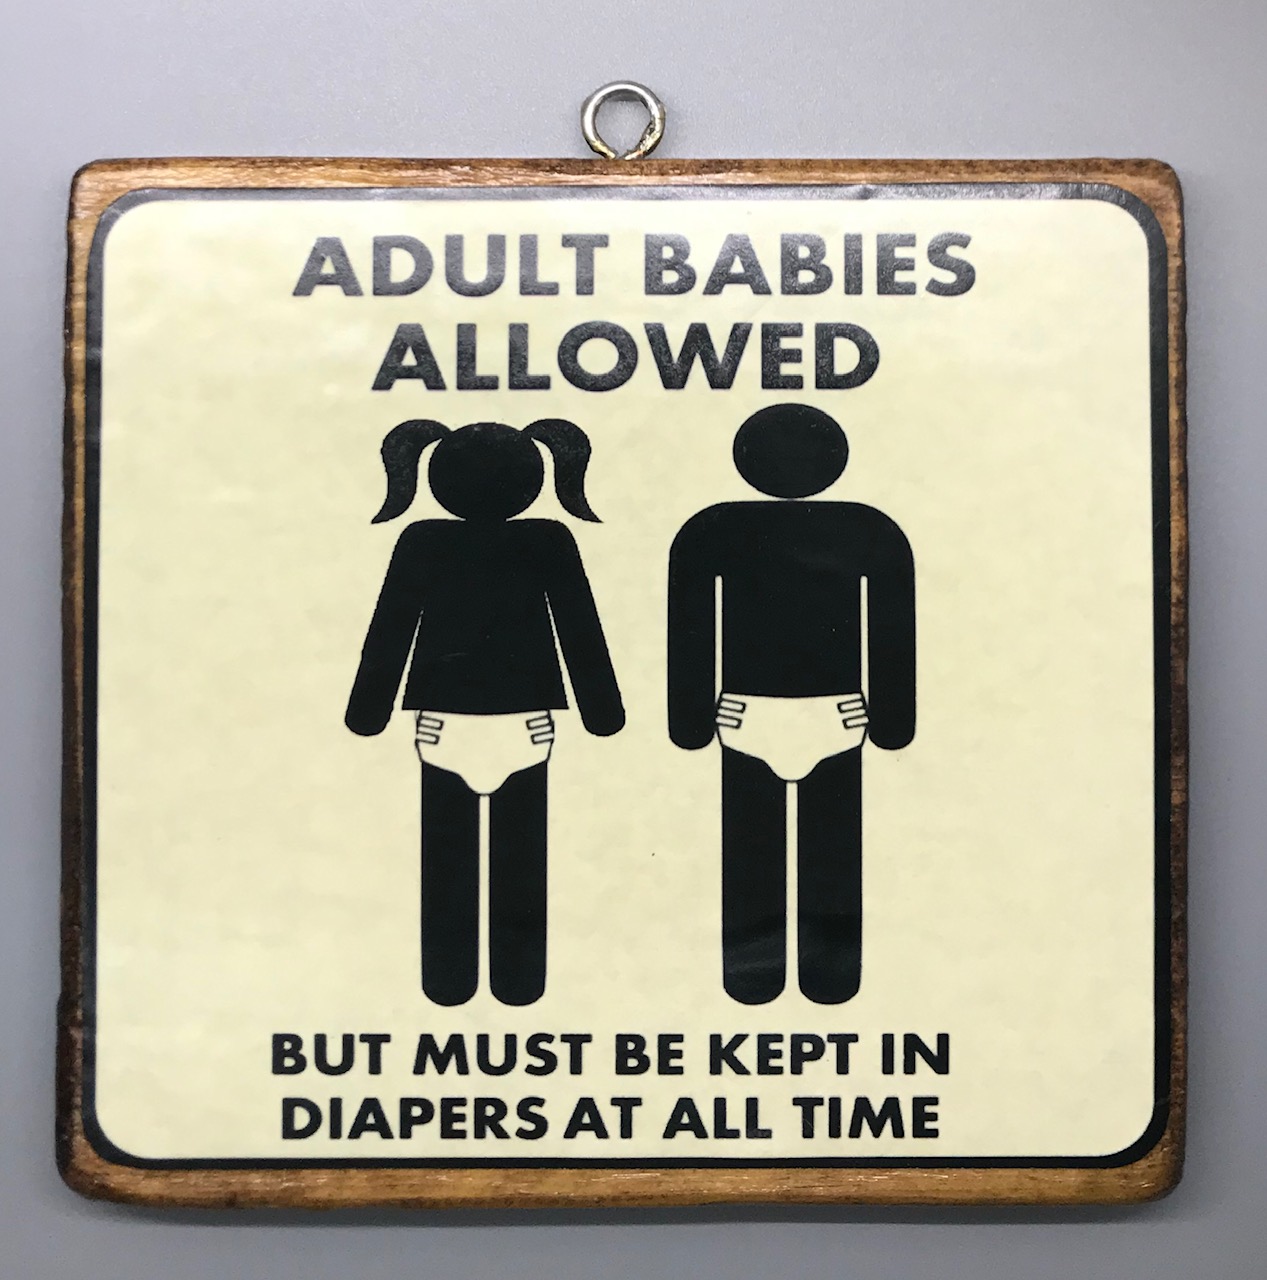 Adult Babies Allowed Sign. 2 Baby Version